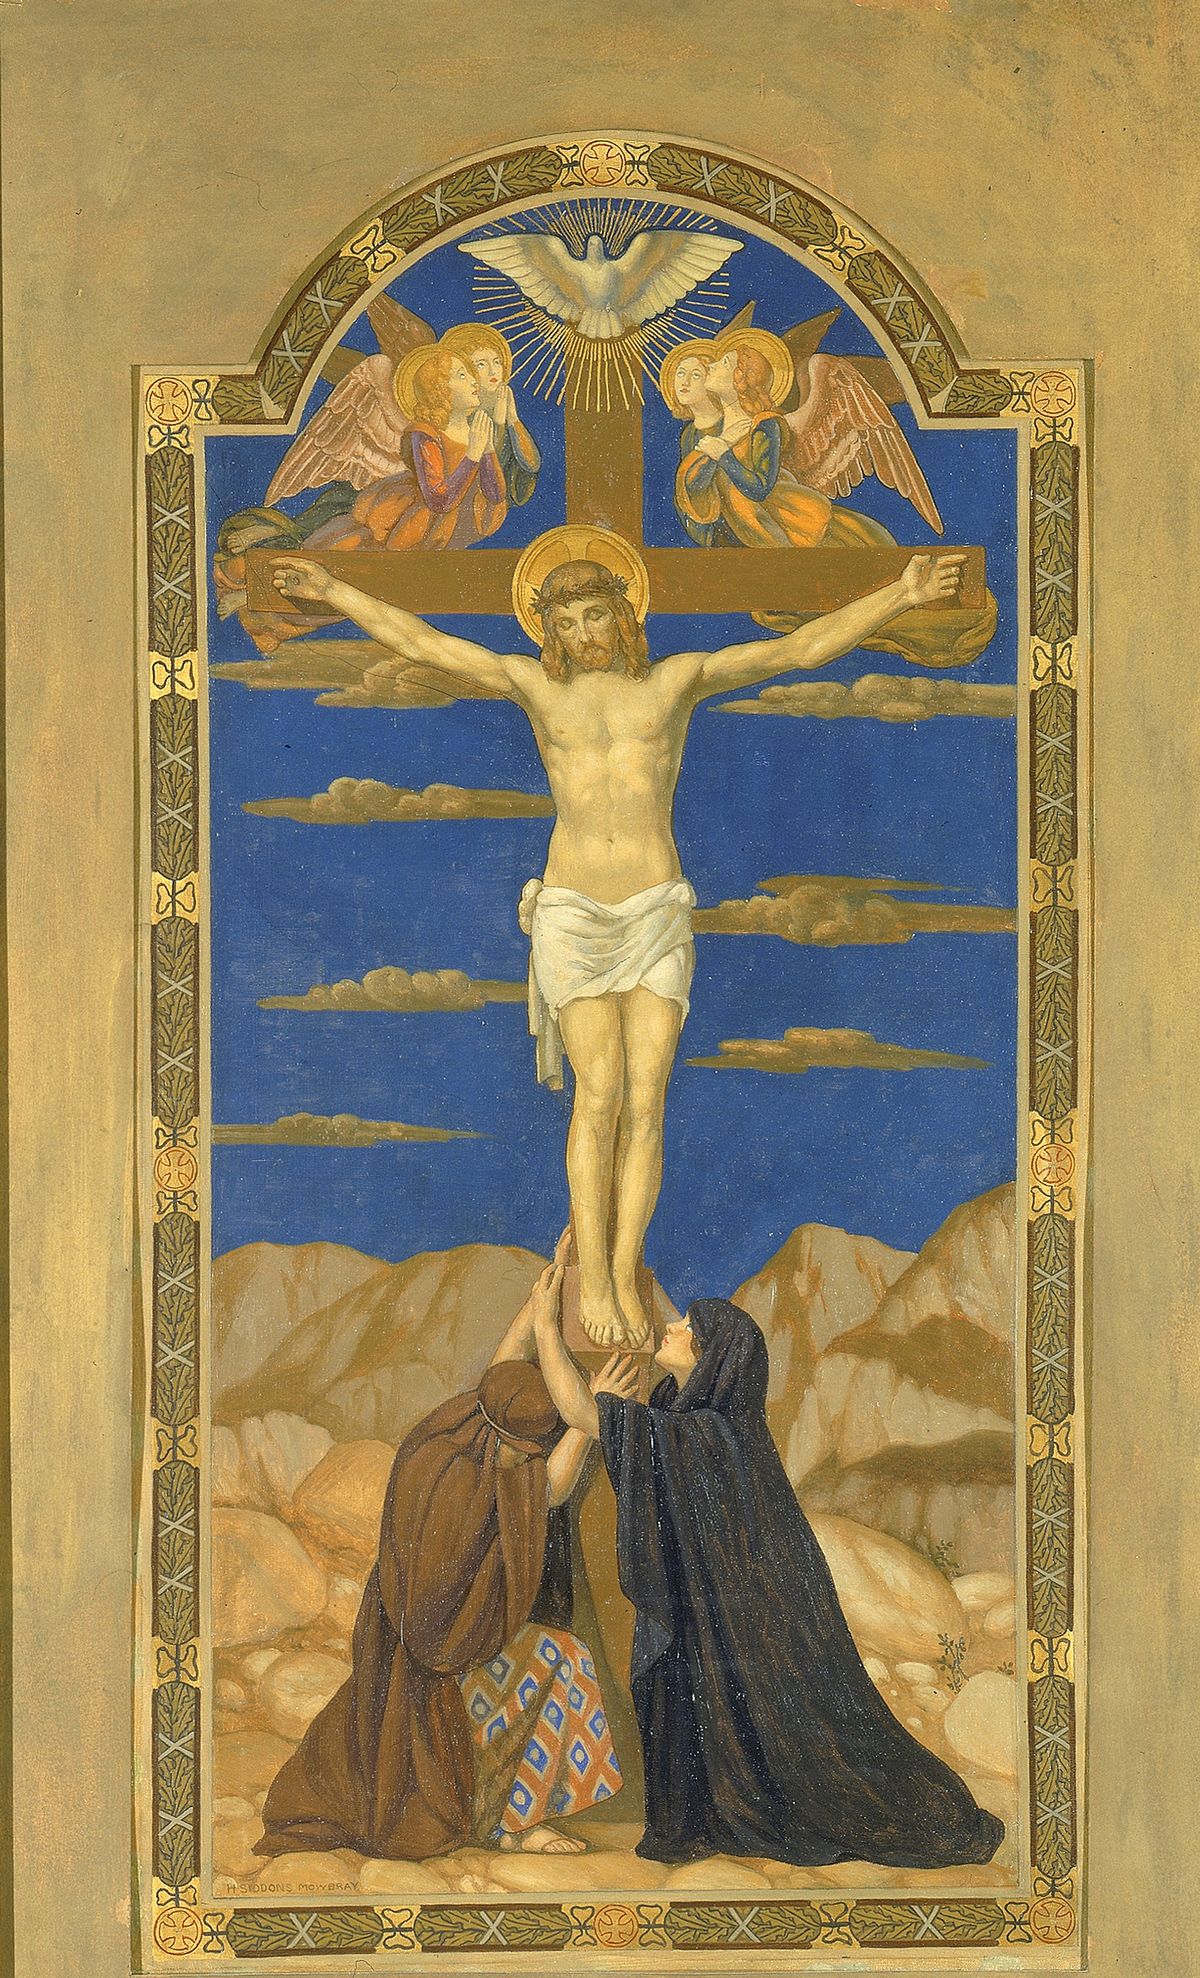 Crucifixion (1915-1925) by H. Siddons Mowbray - Public Domain Bible Painting